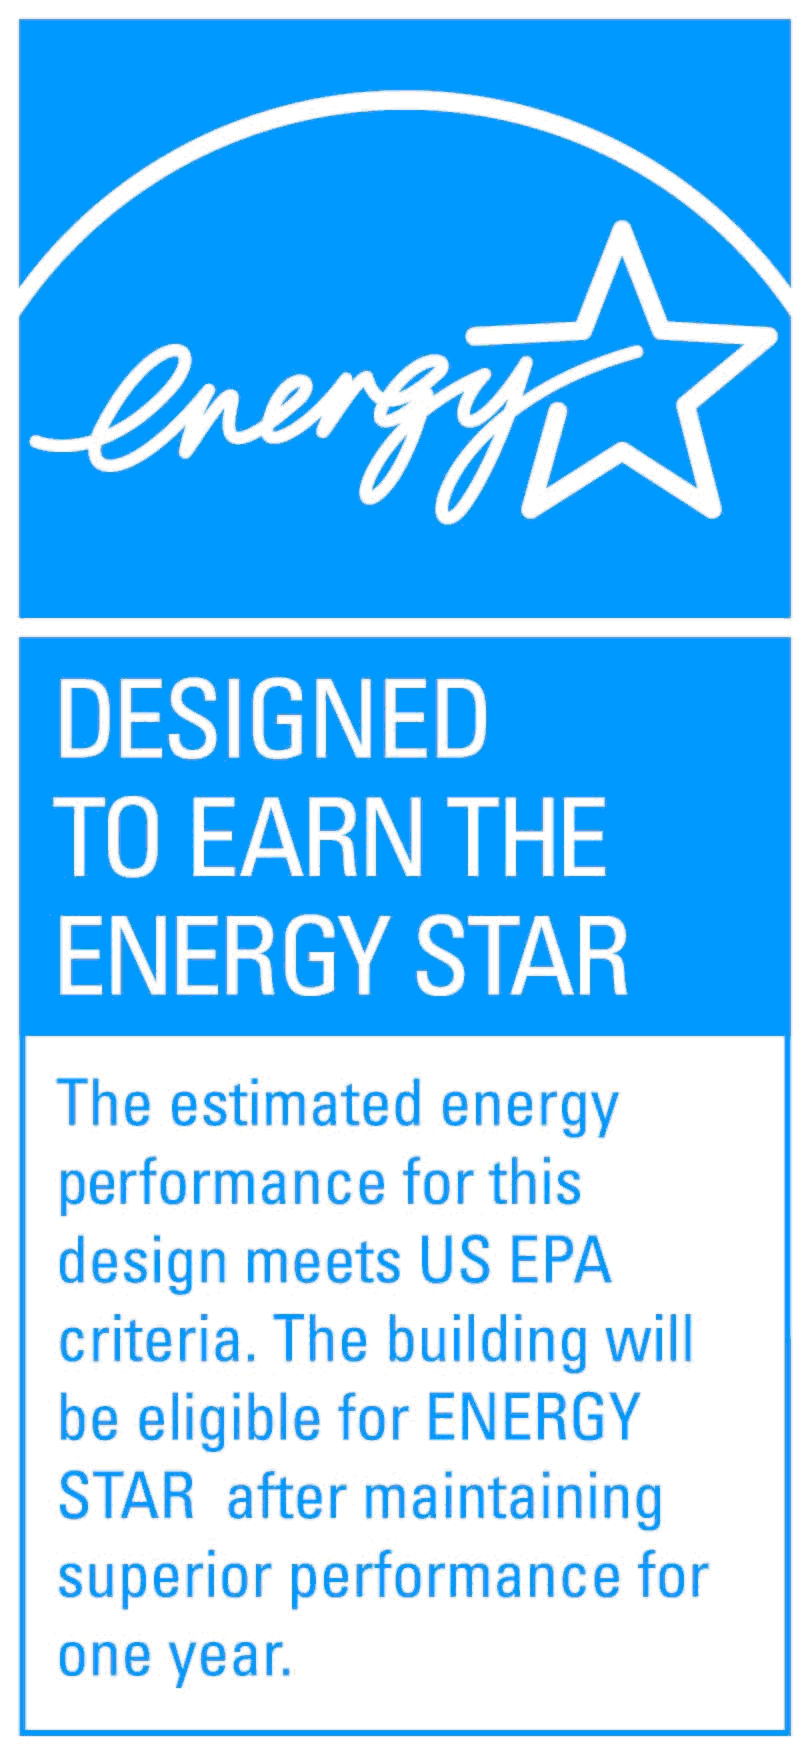 designed to earn the Energy Star